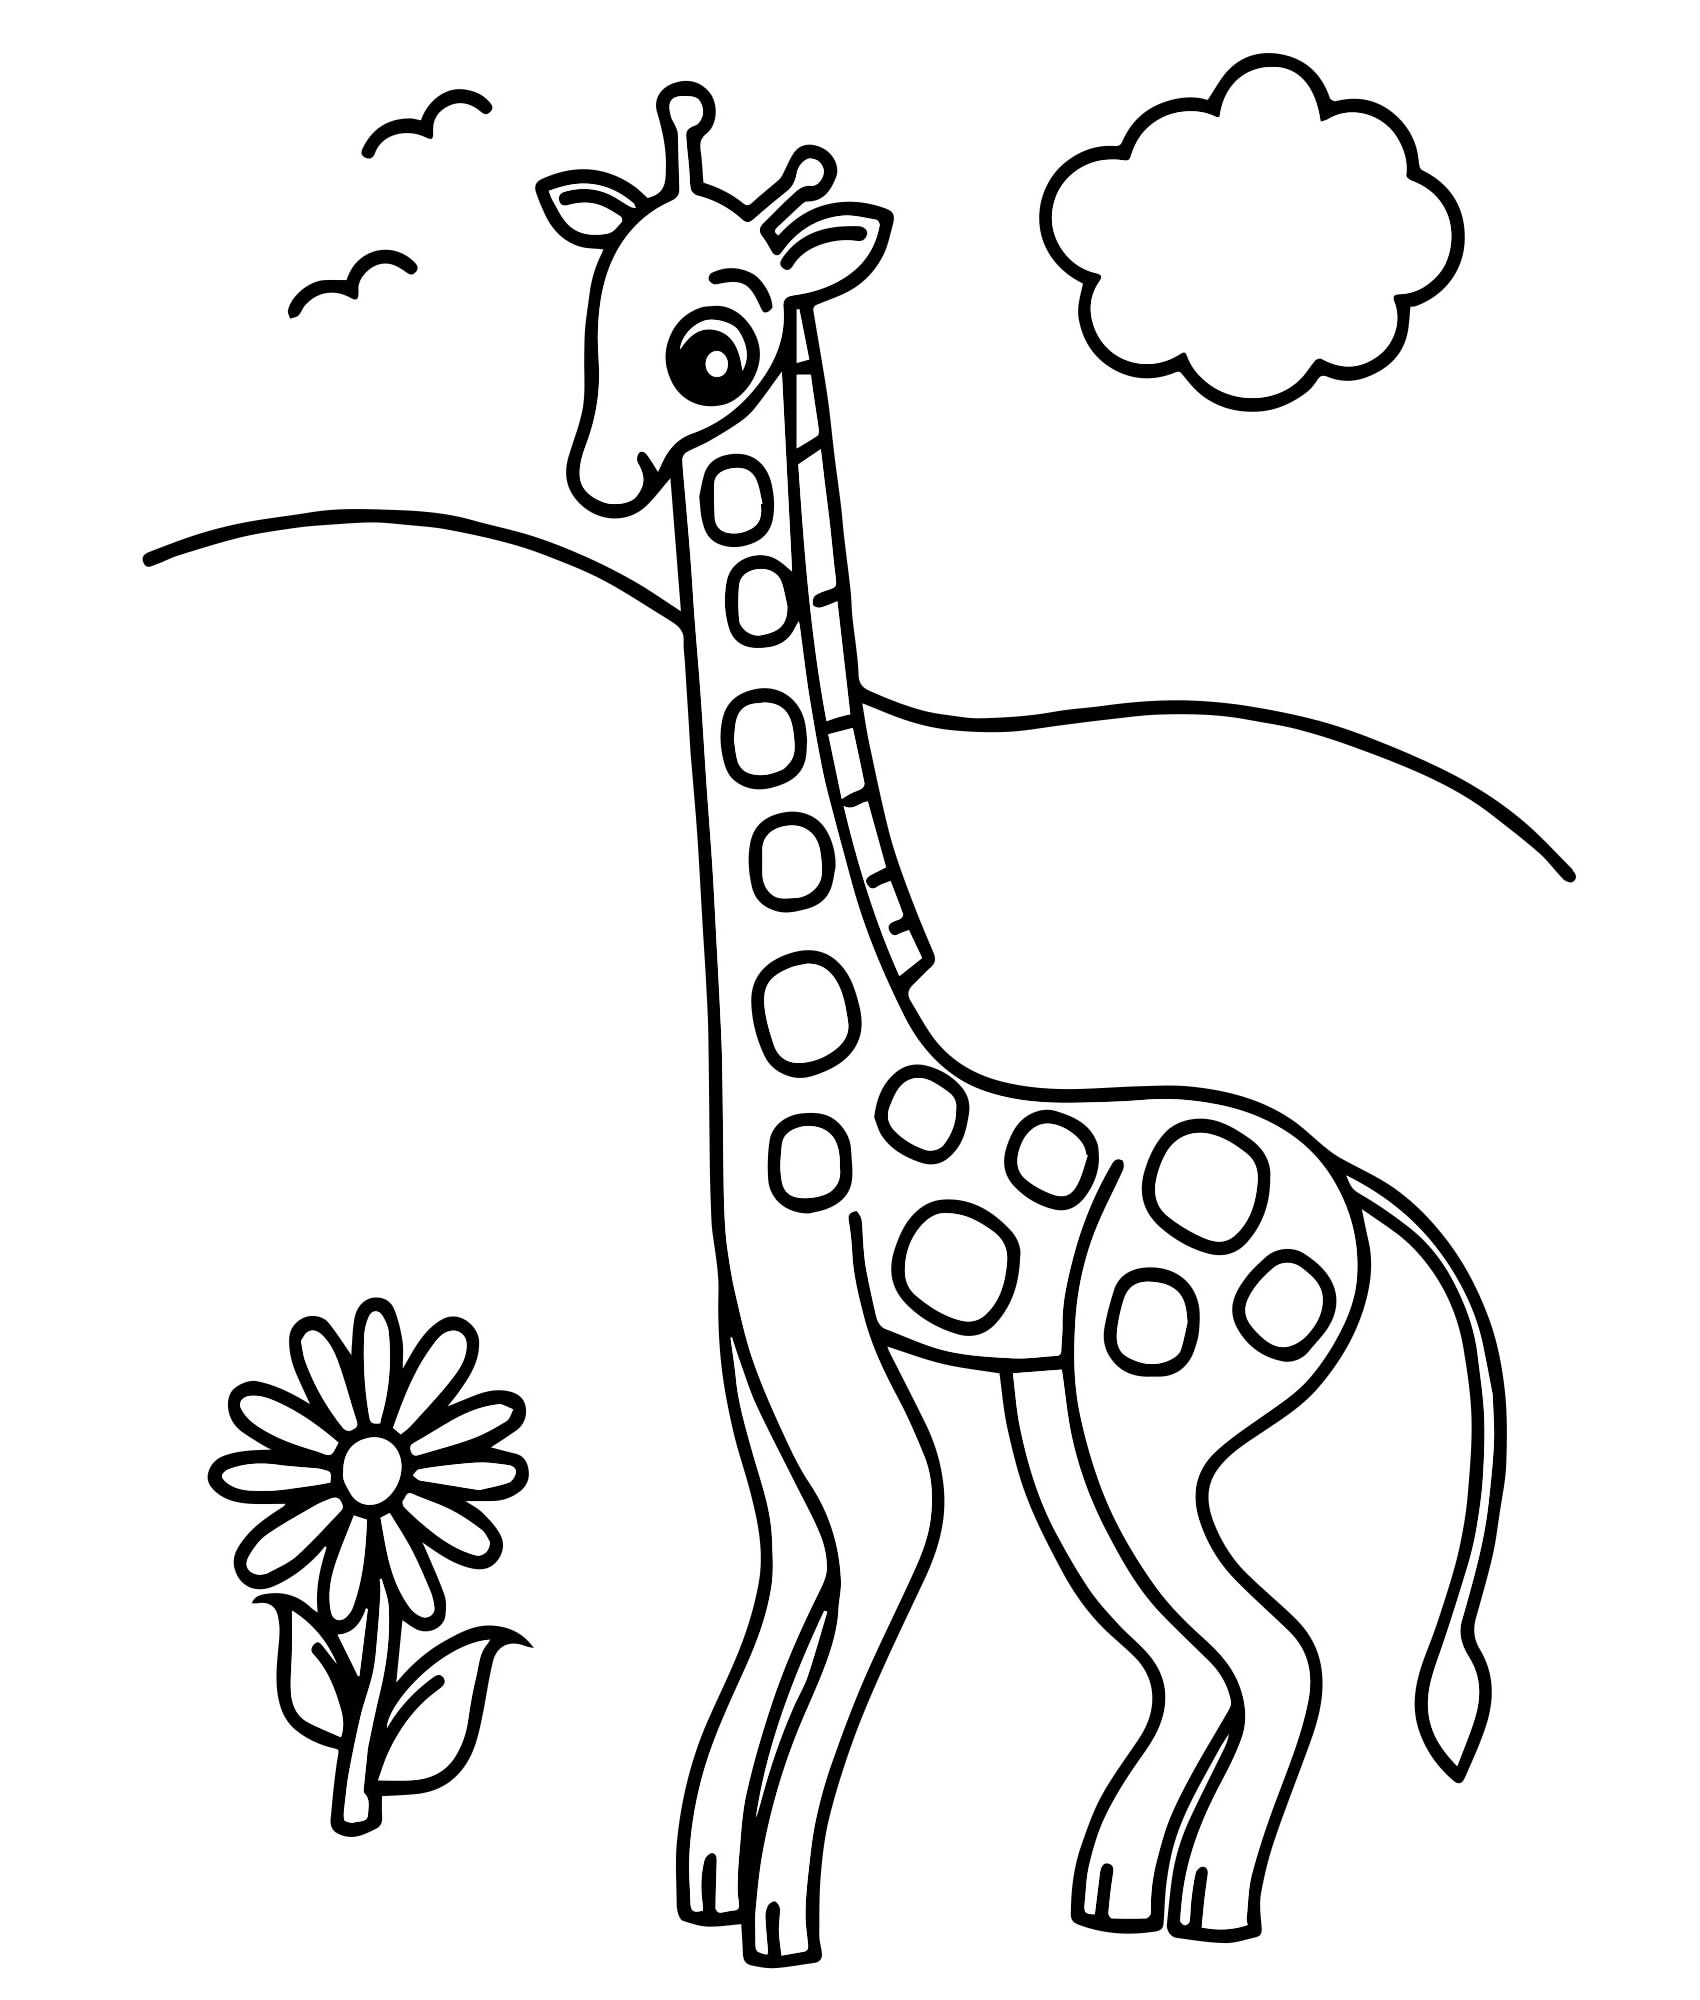 Adorable African Animals Coloring Pages for 4-5 year olds